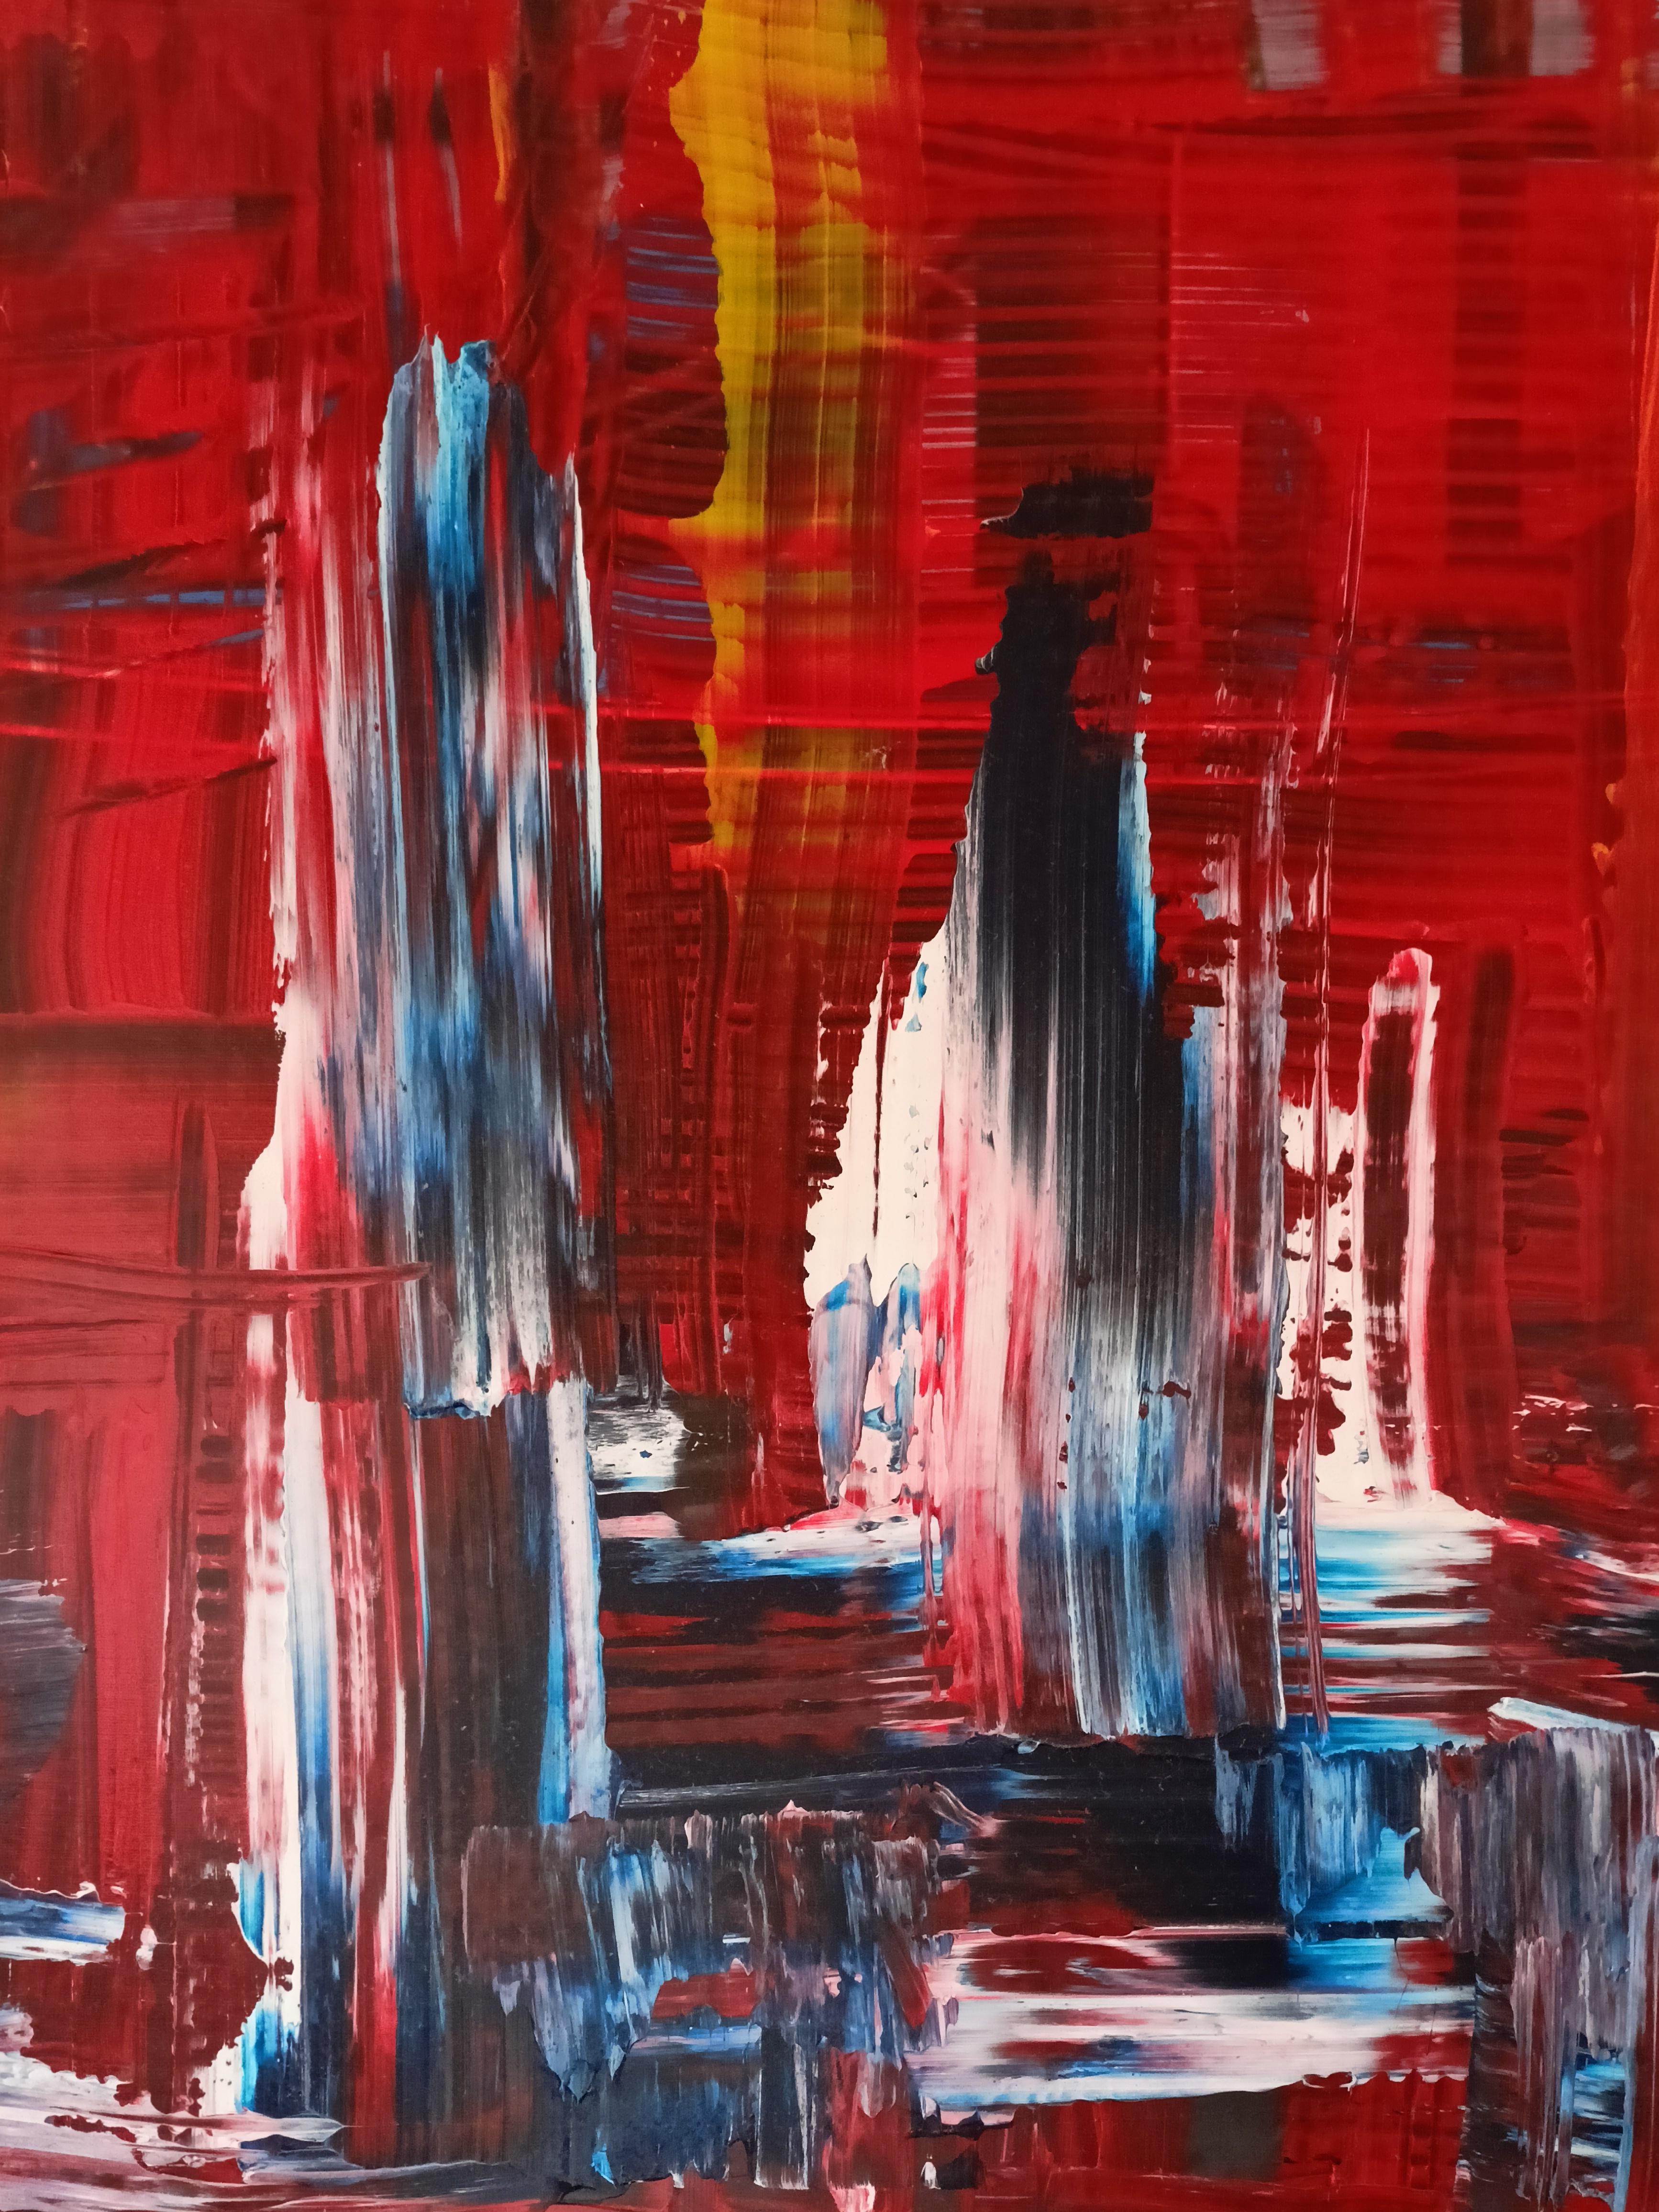 Venice / Acrylic on board, own technique / 95 x 135 cm - Abstract Expressionist Painting by Tadeusz Zych